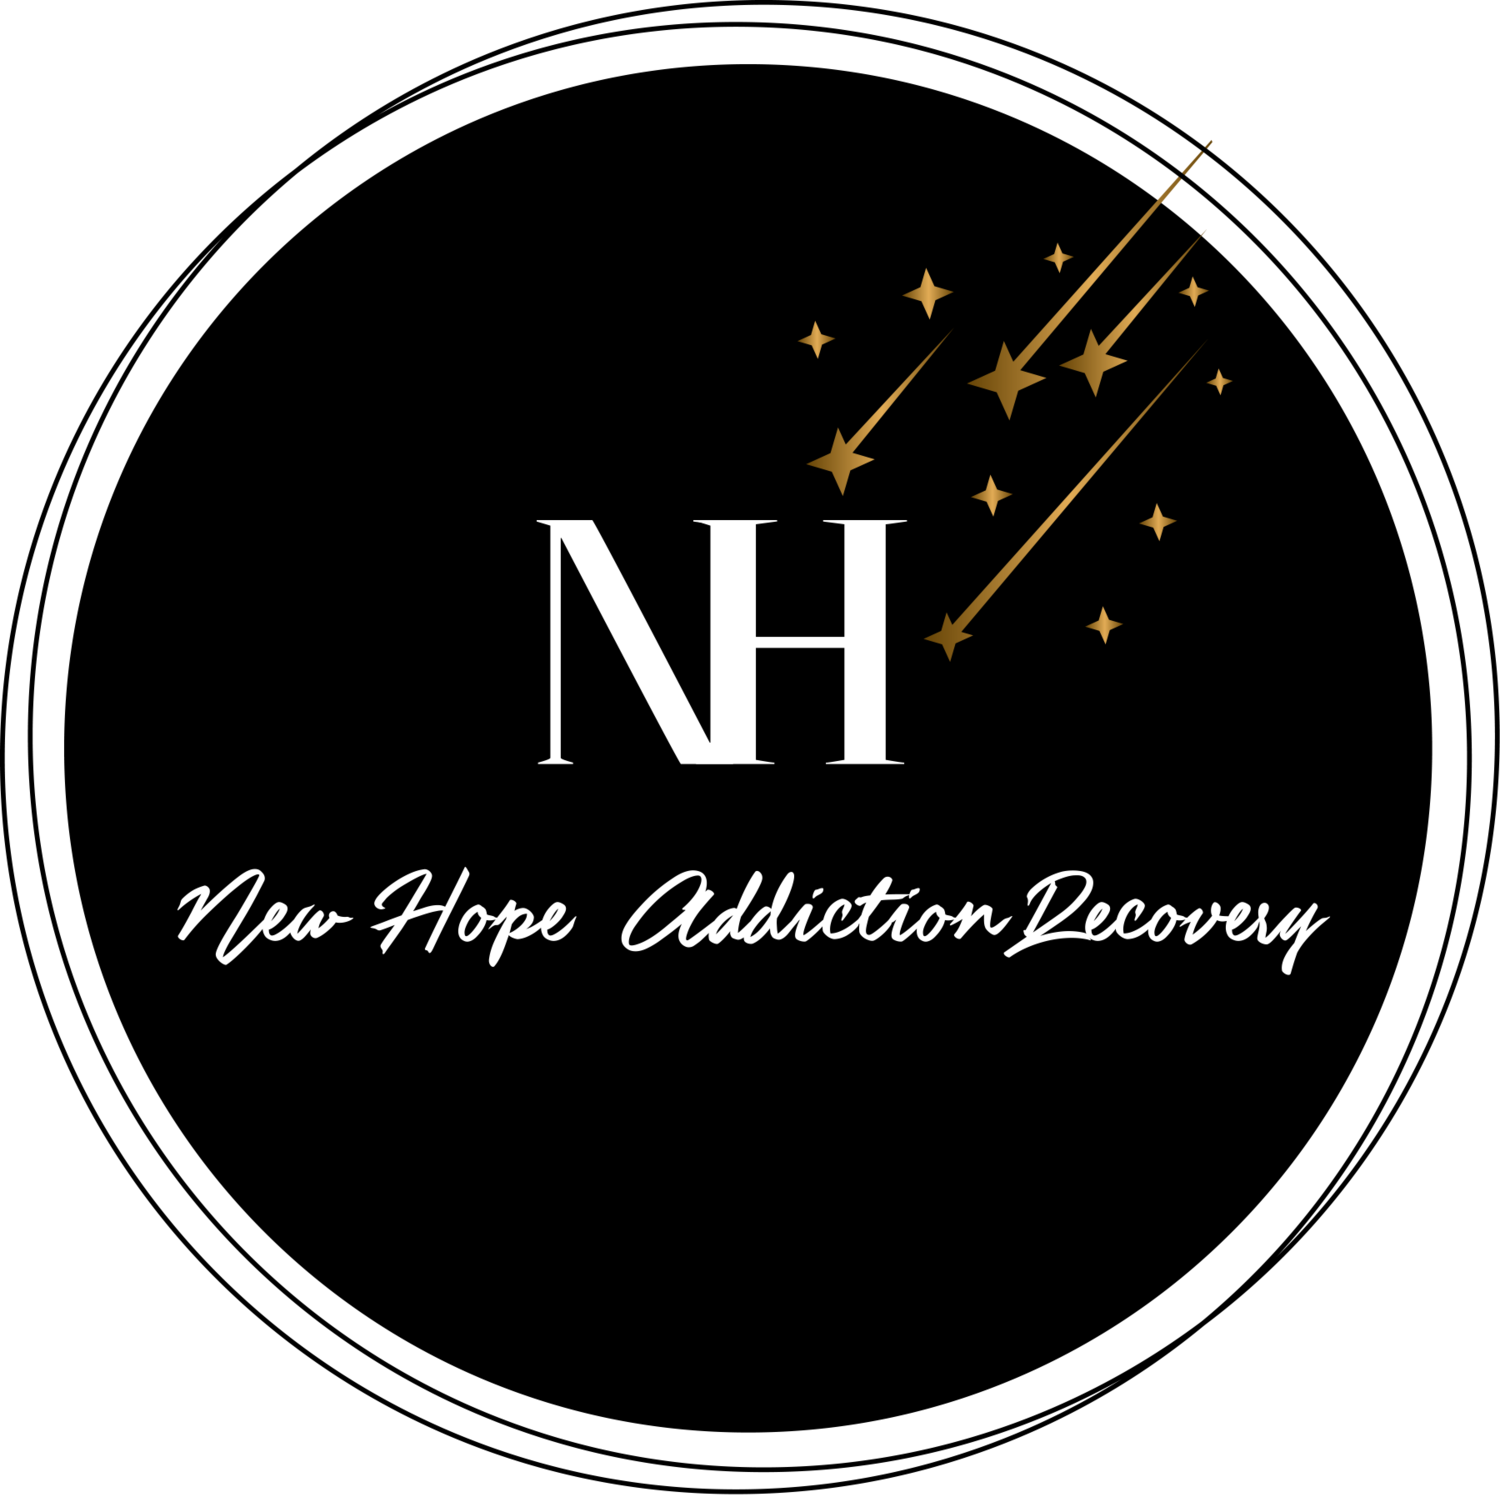 New Hope Addiction Recovery